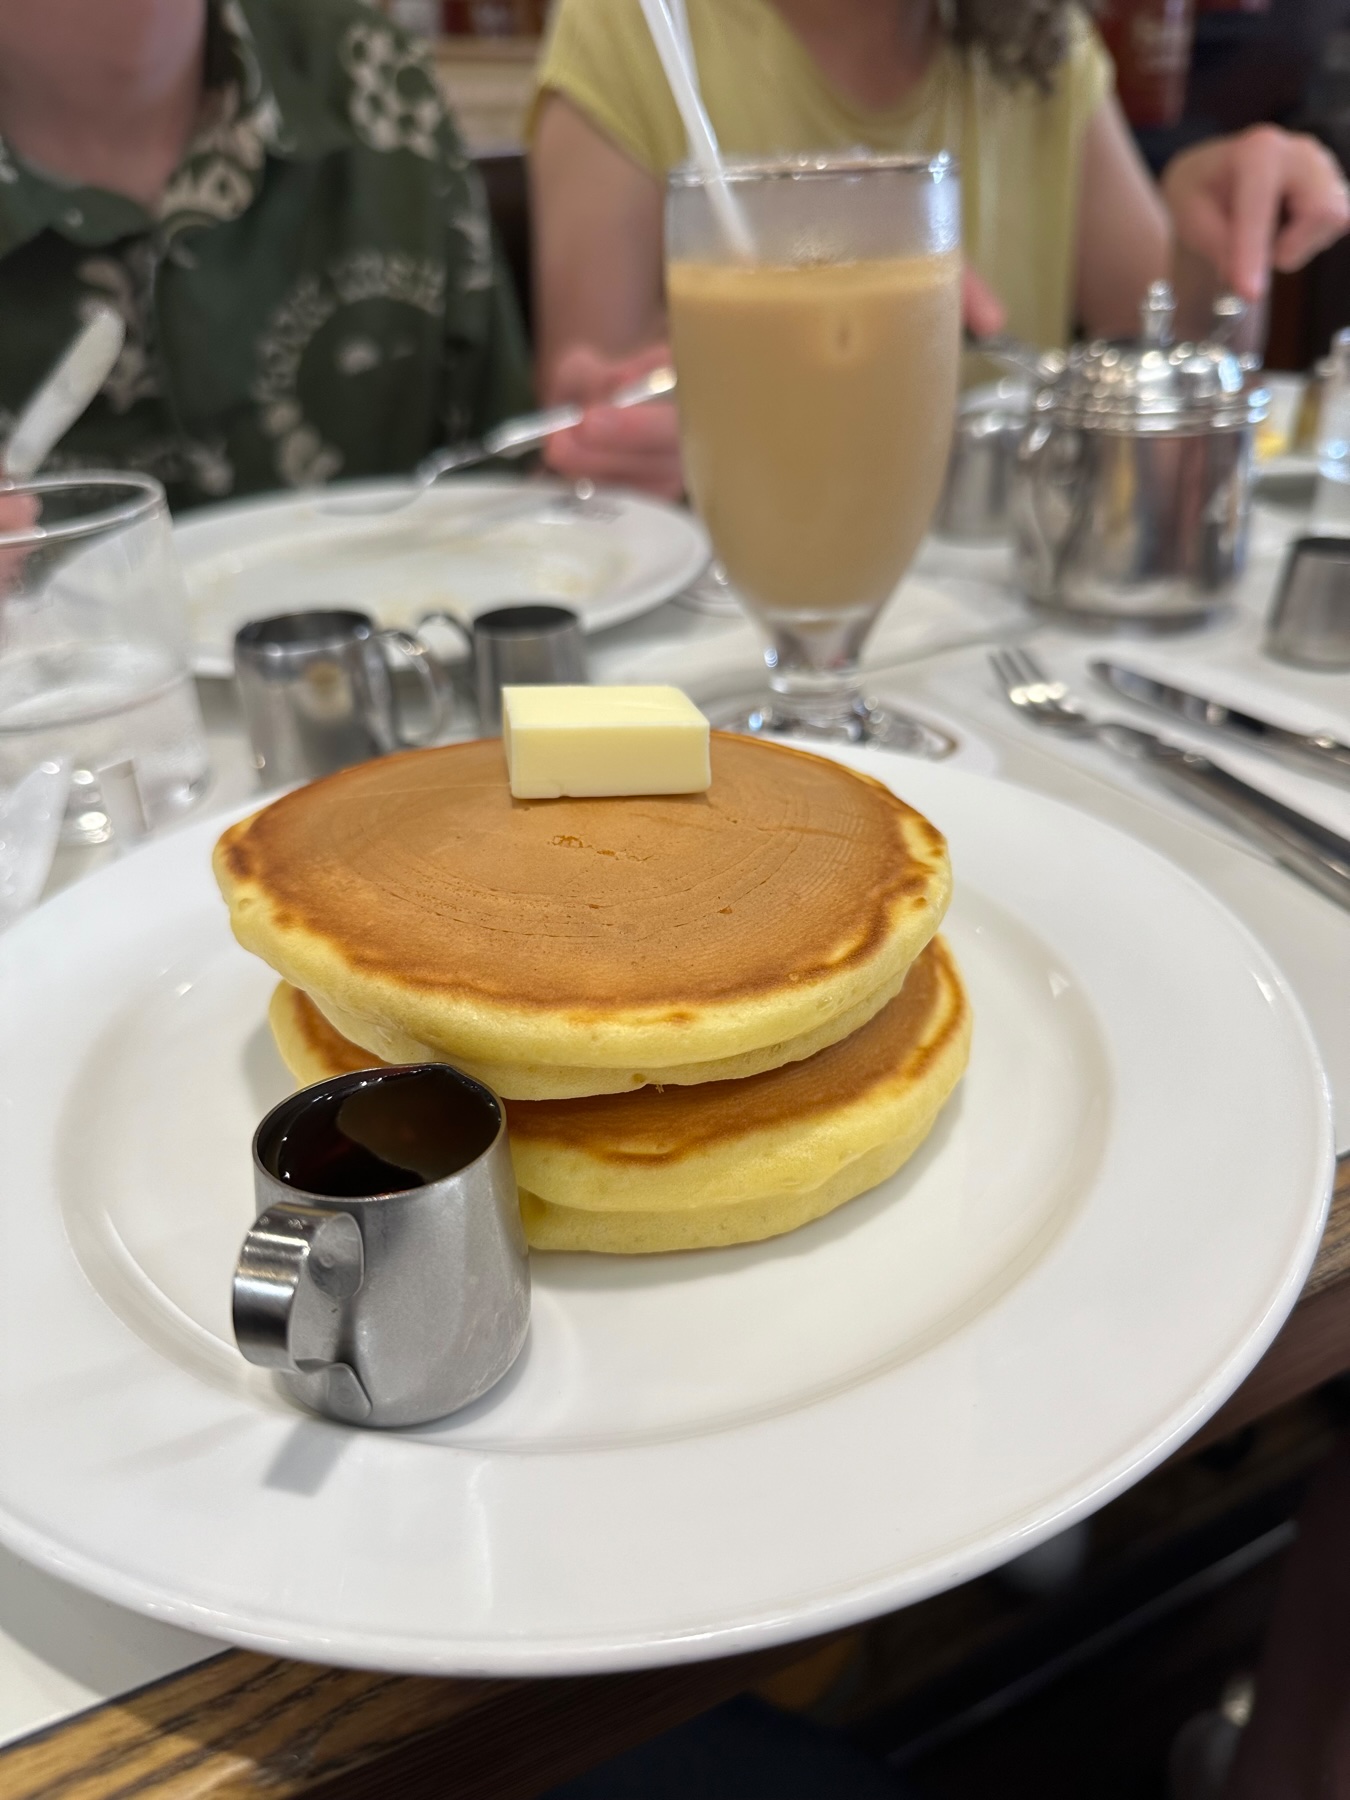 A plate of &ldquo;hot cake&rdquo; pancakes with  tiny jug of maple syrup on the side